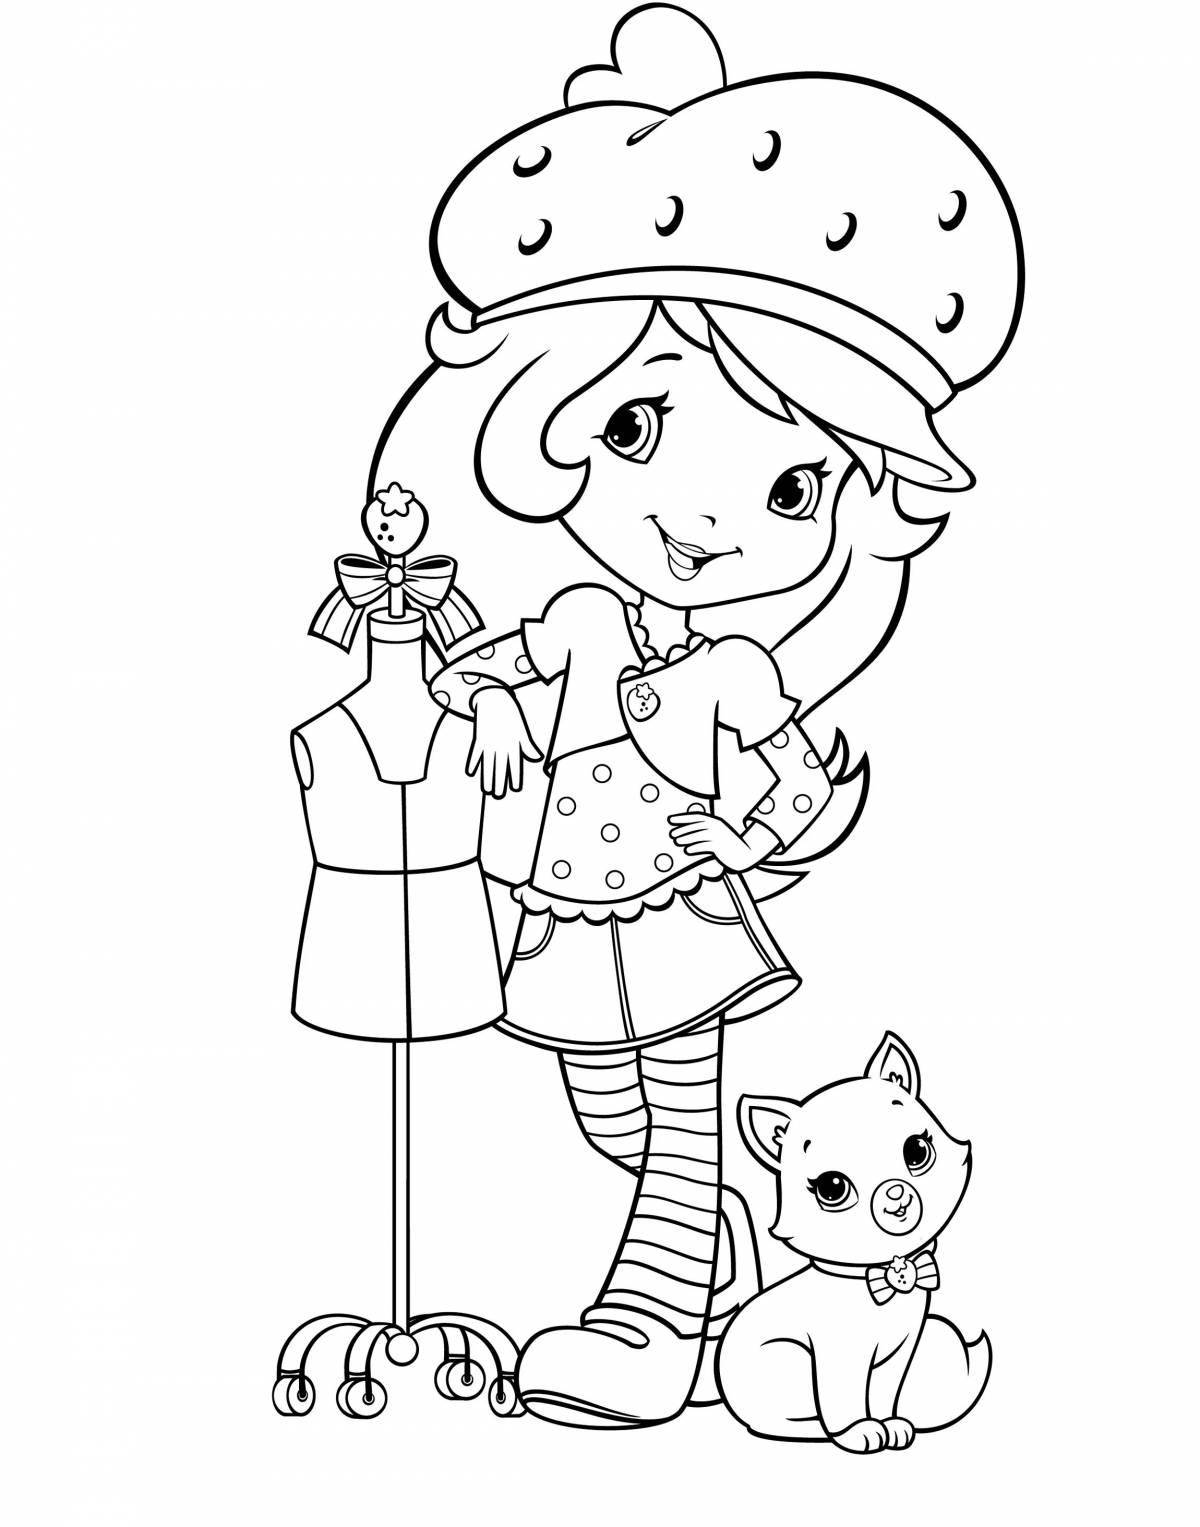 Charlotte's quirky strawberry coloring book for girls